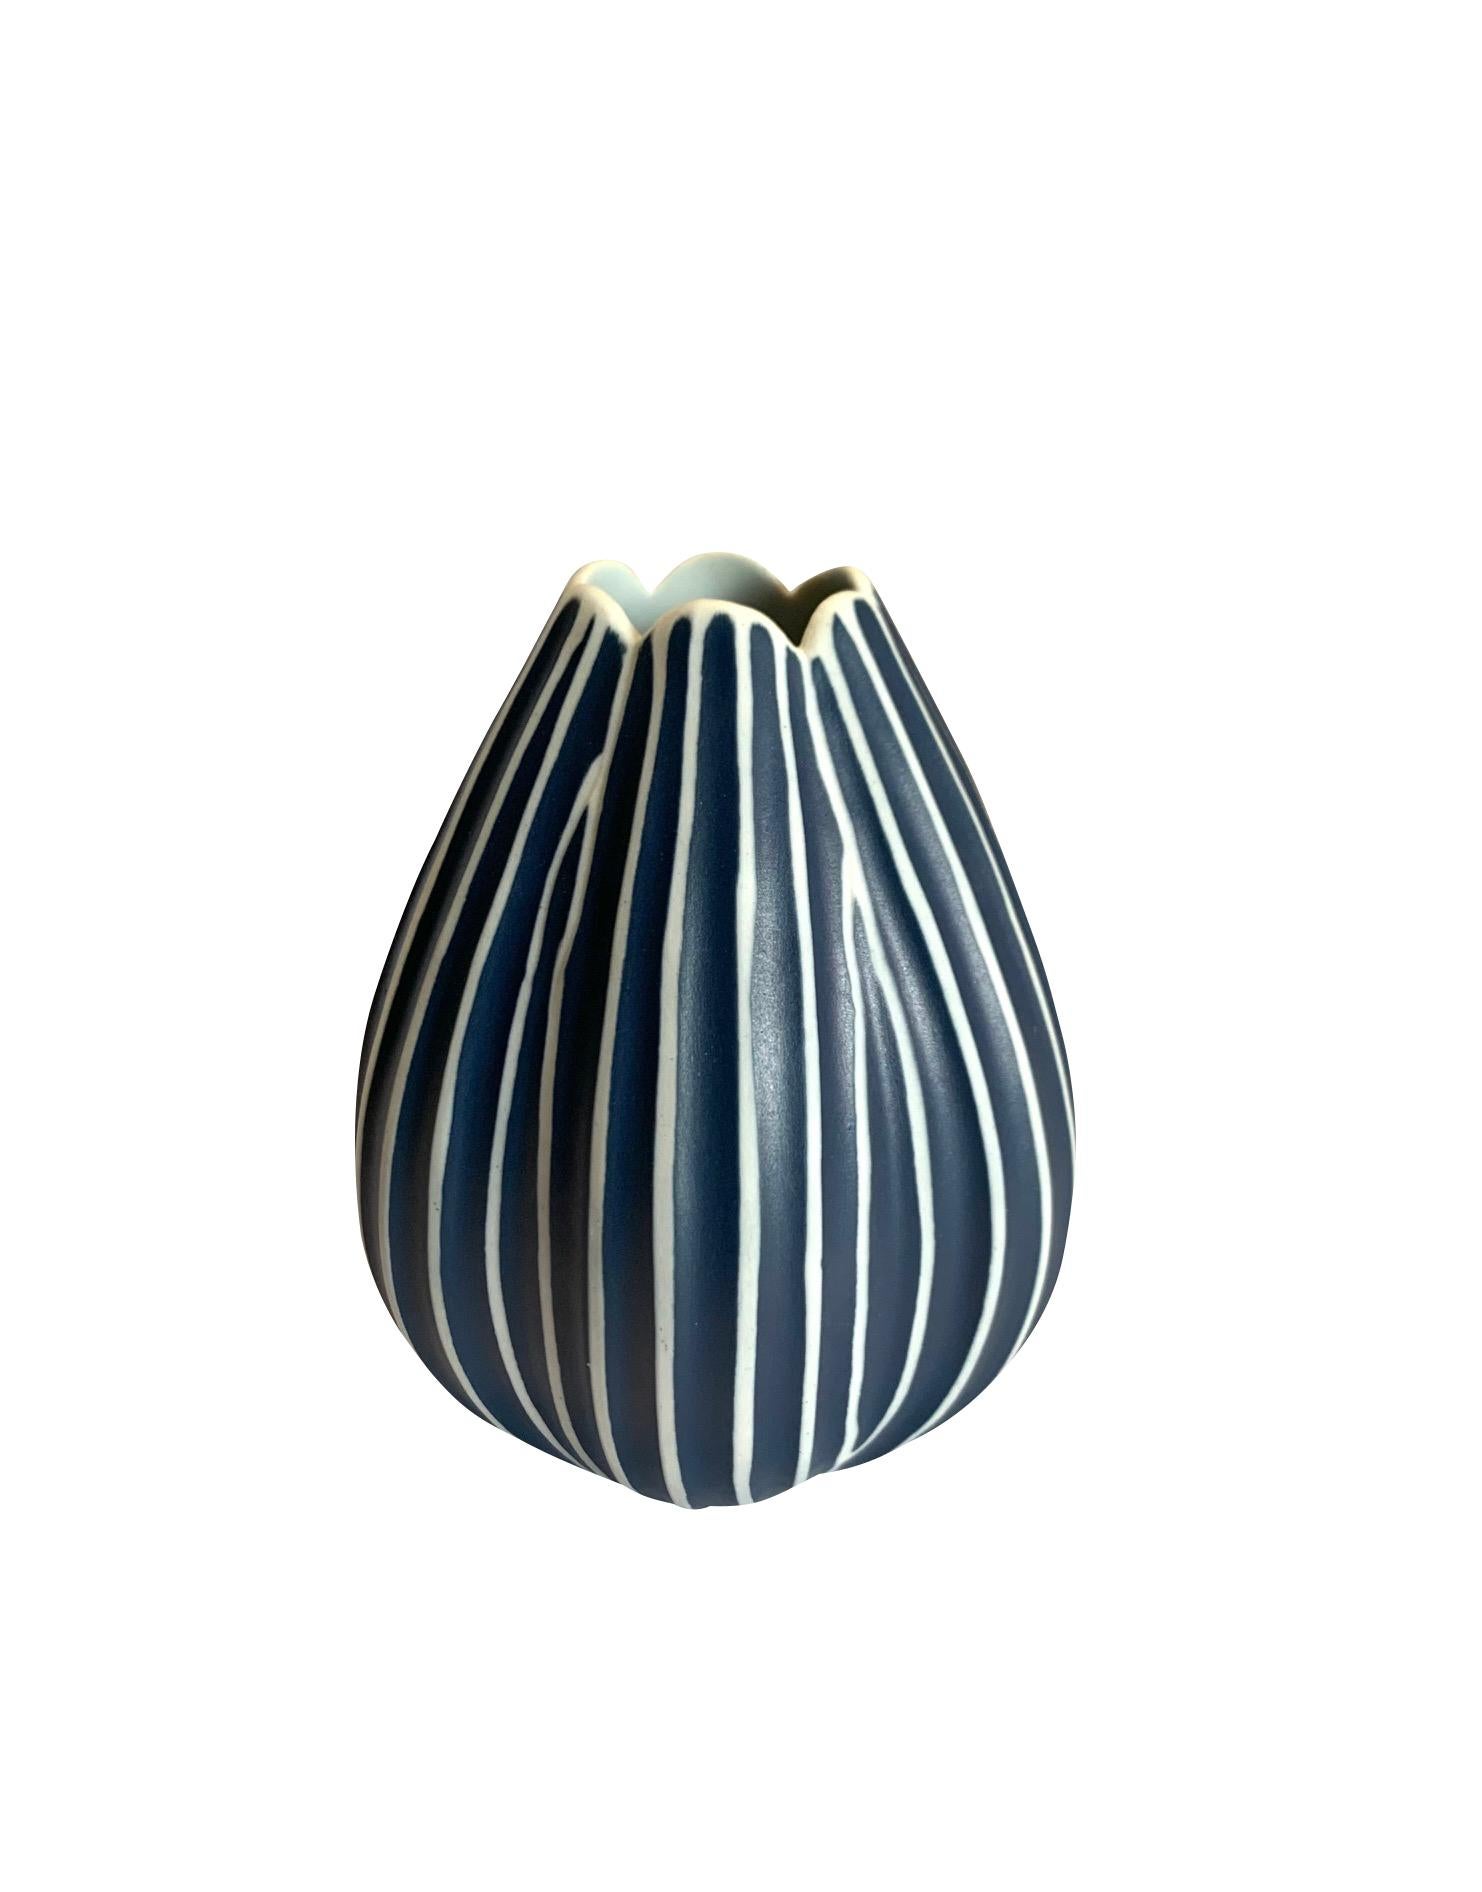 Contemporary Thailand dark blue and white vertical stripe vase.
Lotus design shape
Can hold water
Part of a collection of unusually shaped blue and white vases.
See image #5.